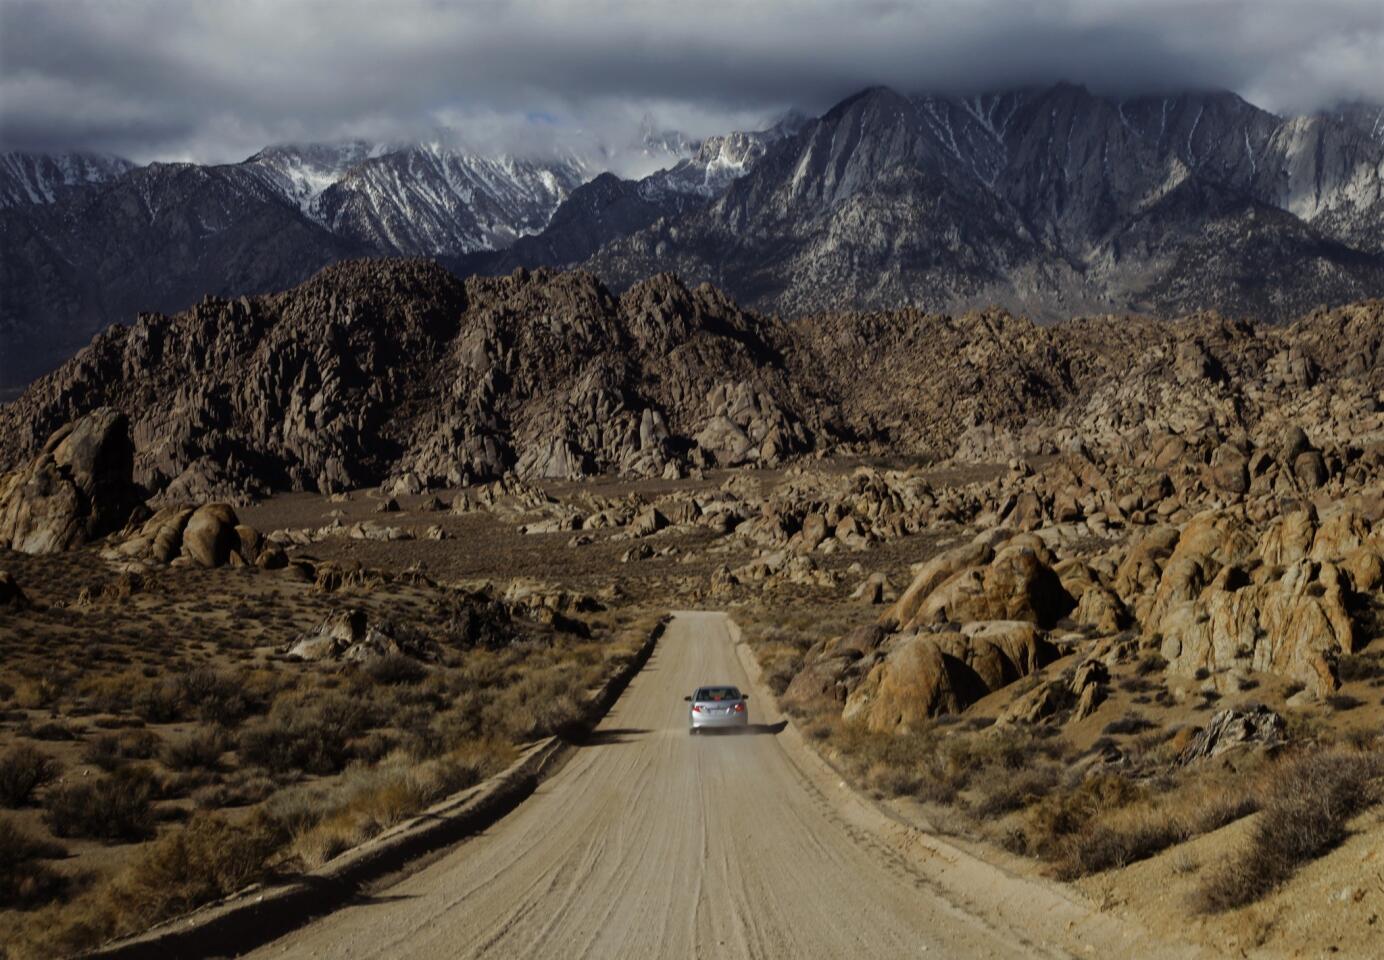 Alabama Hills: Driving in